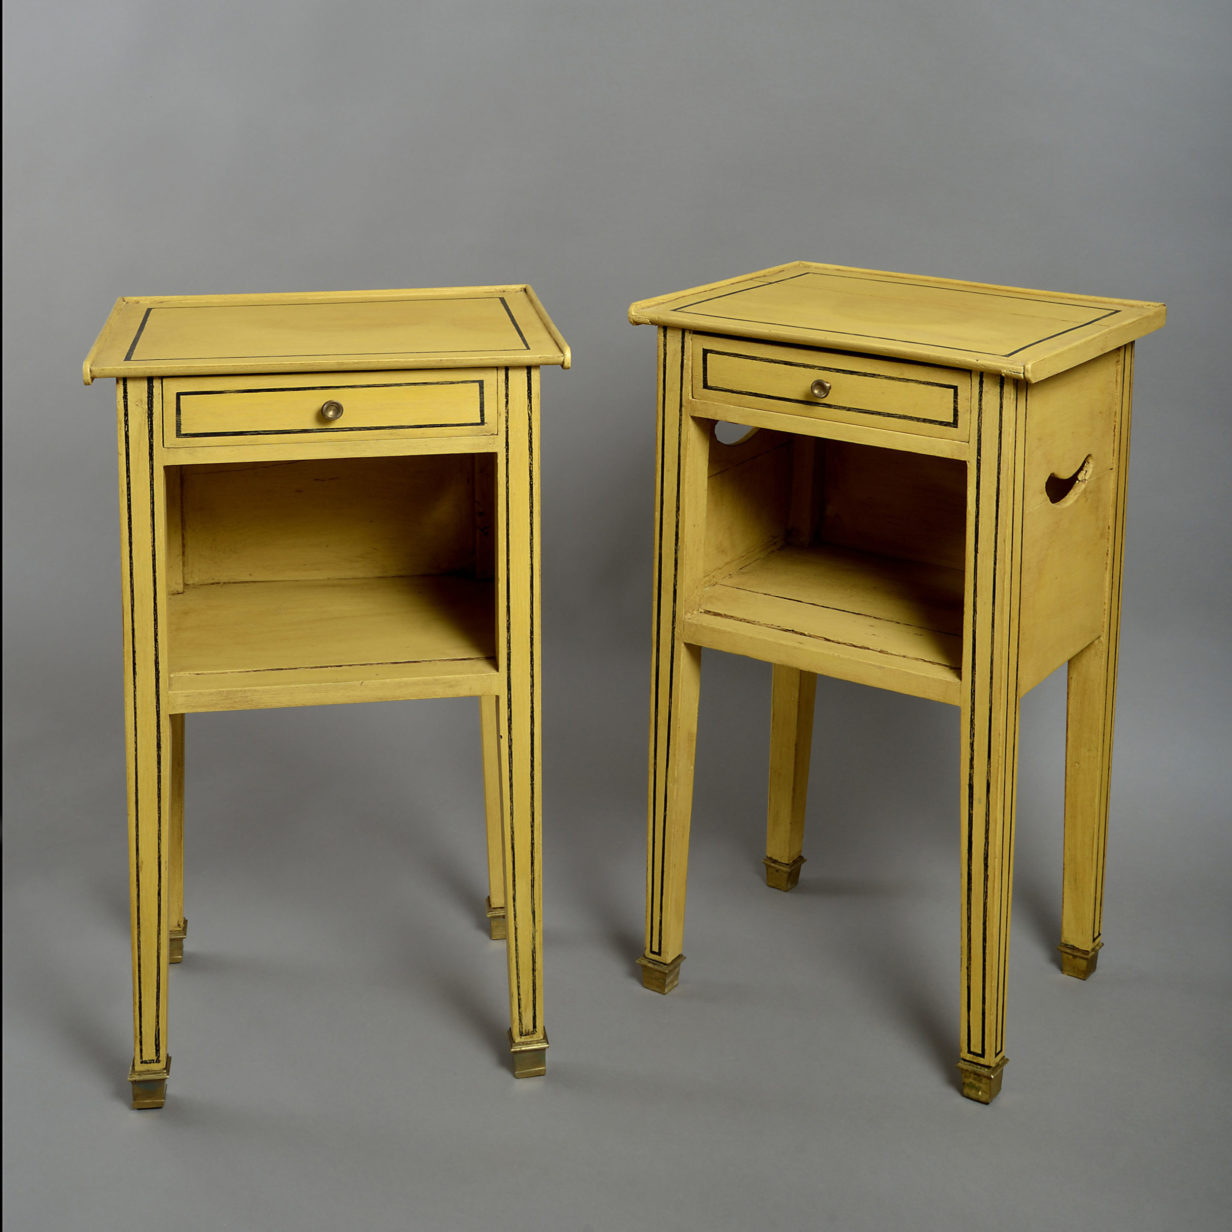 A pair of 19th century painted bedside tables